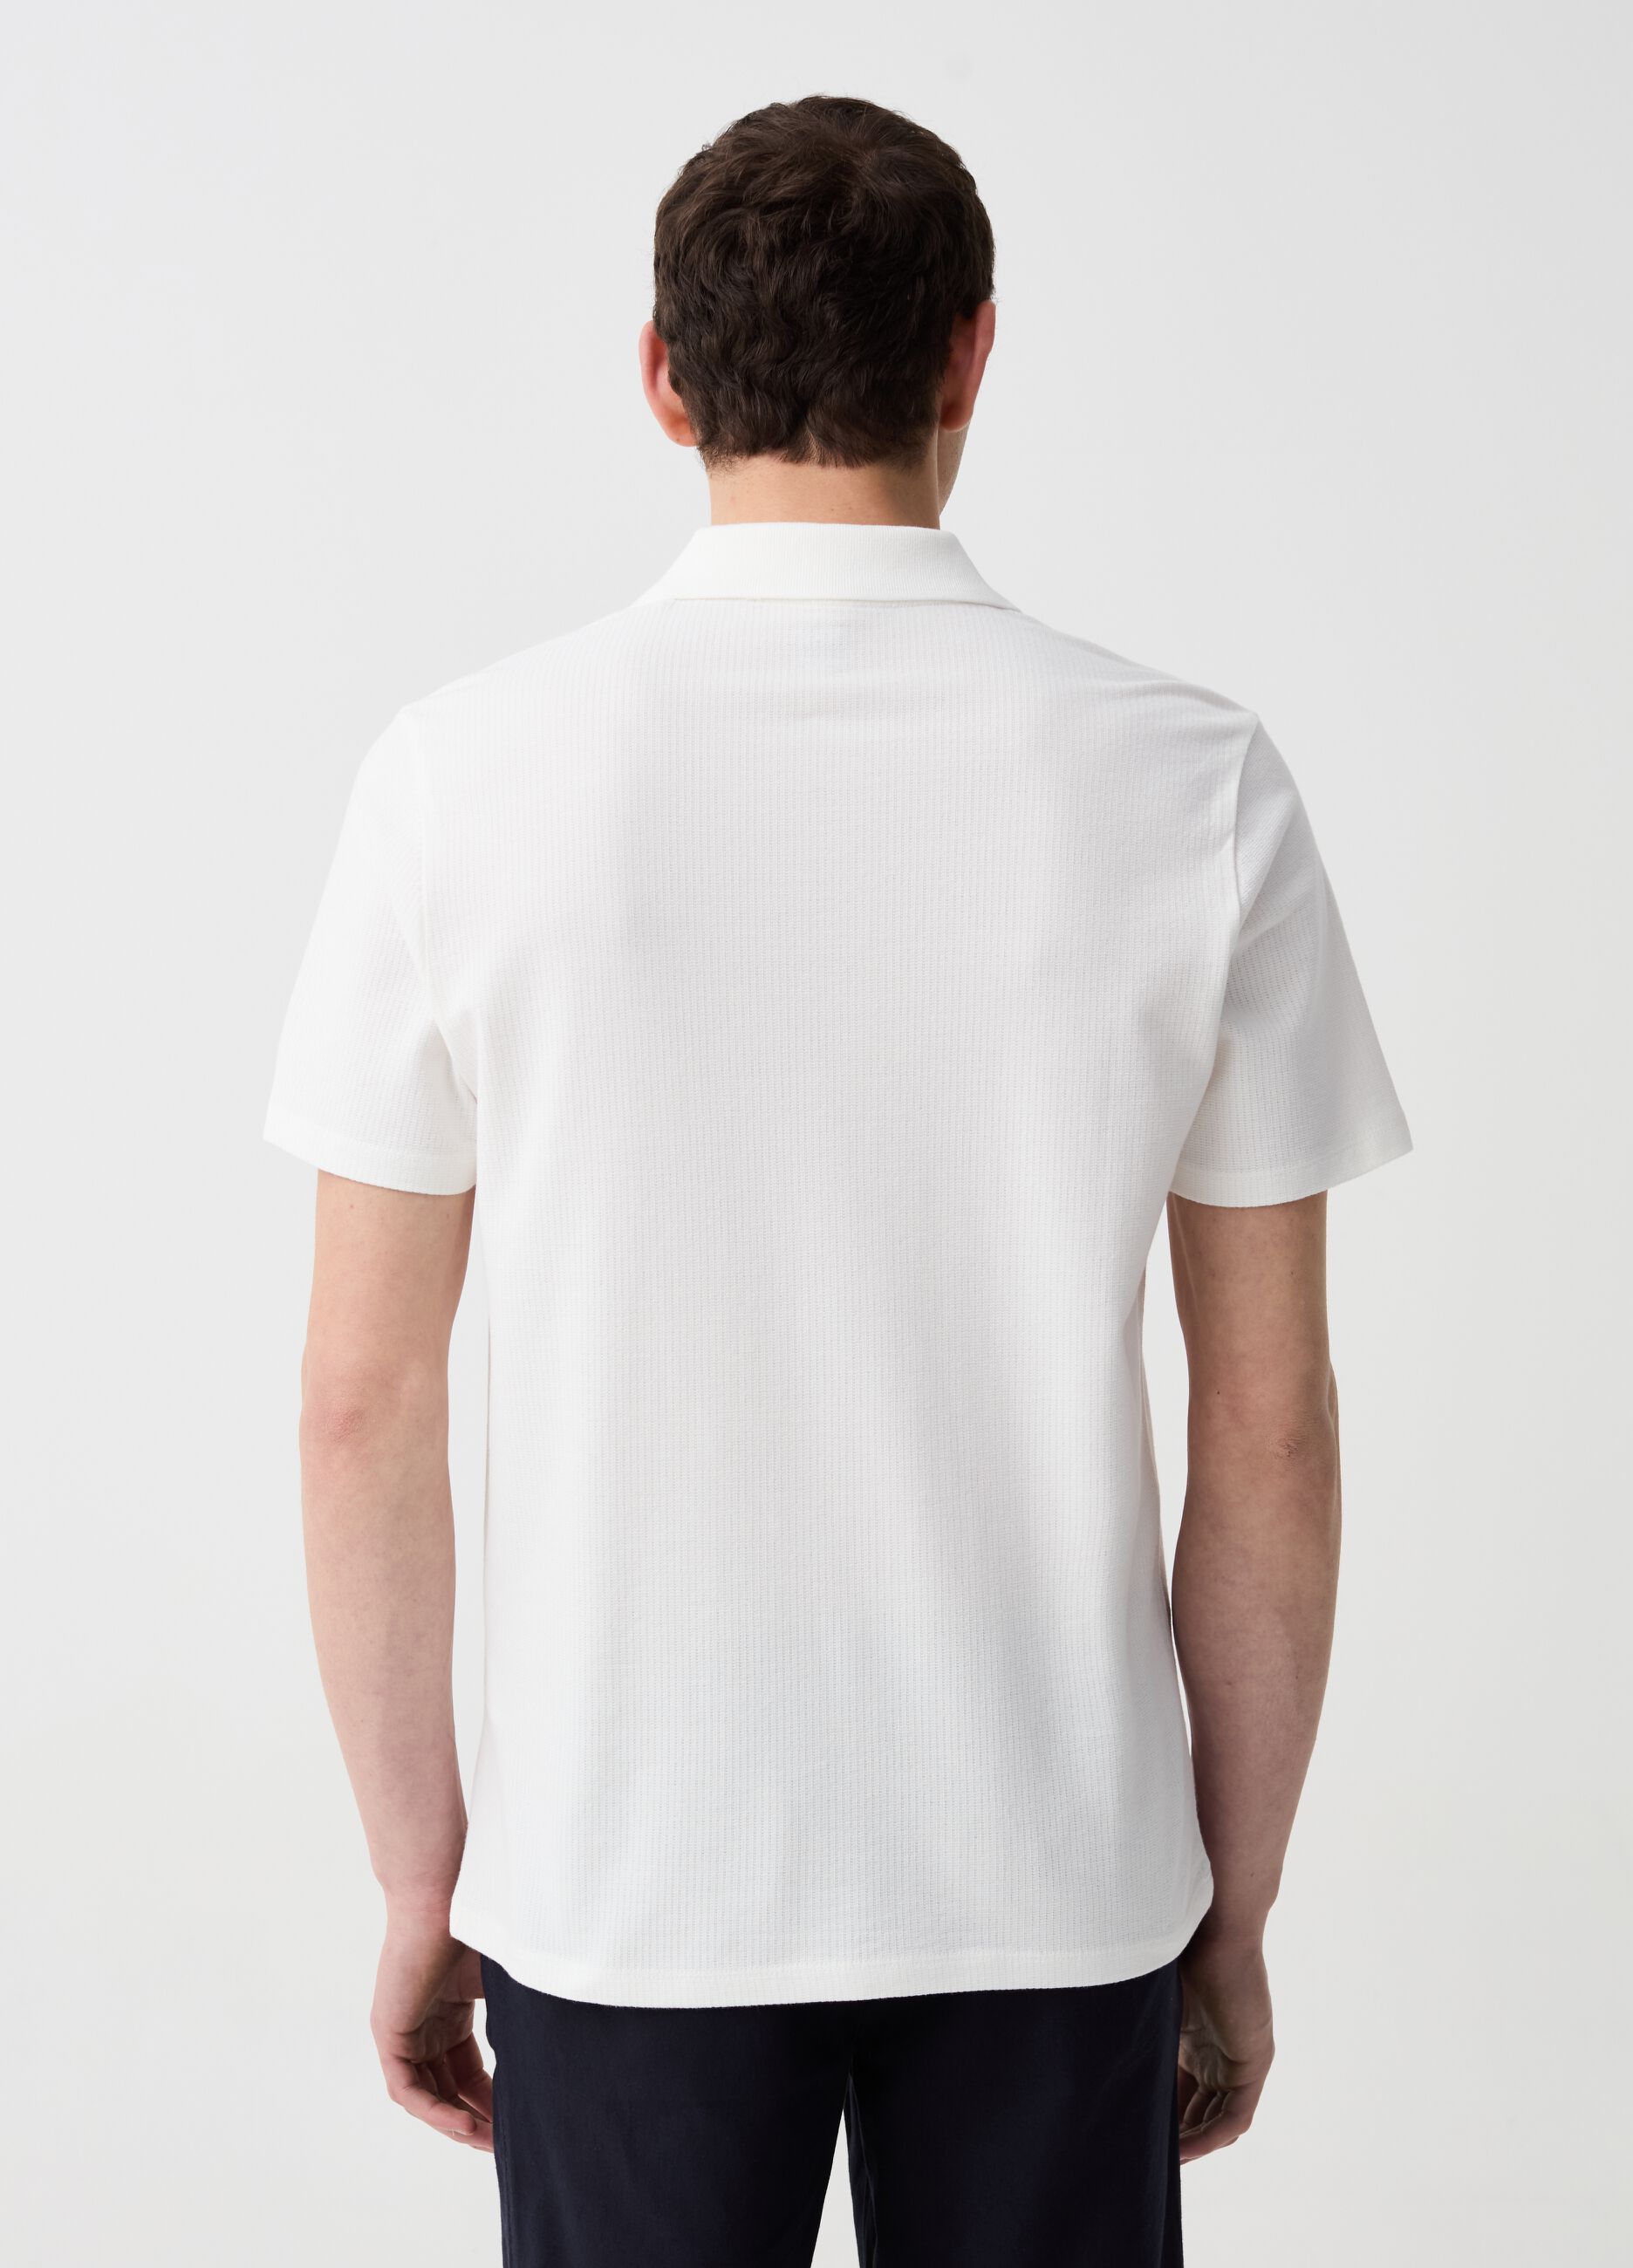 Organic cotton polo shirt with textured weave